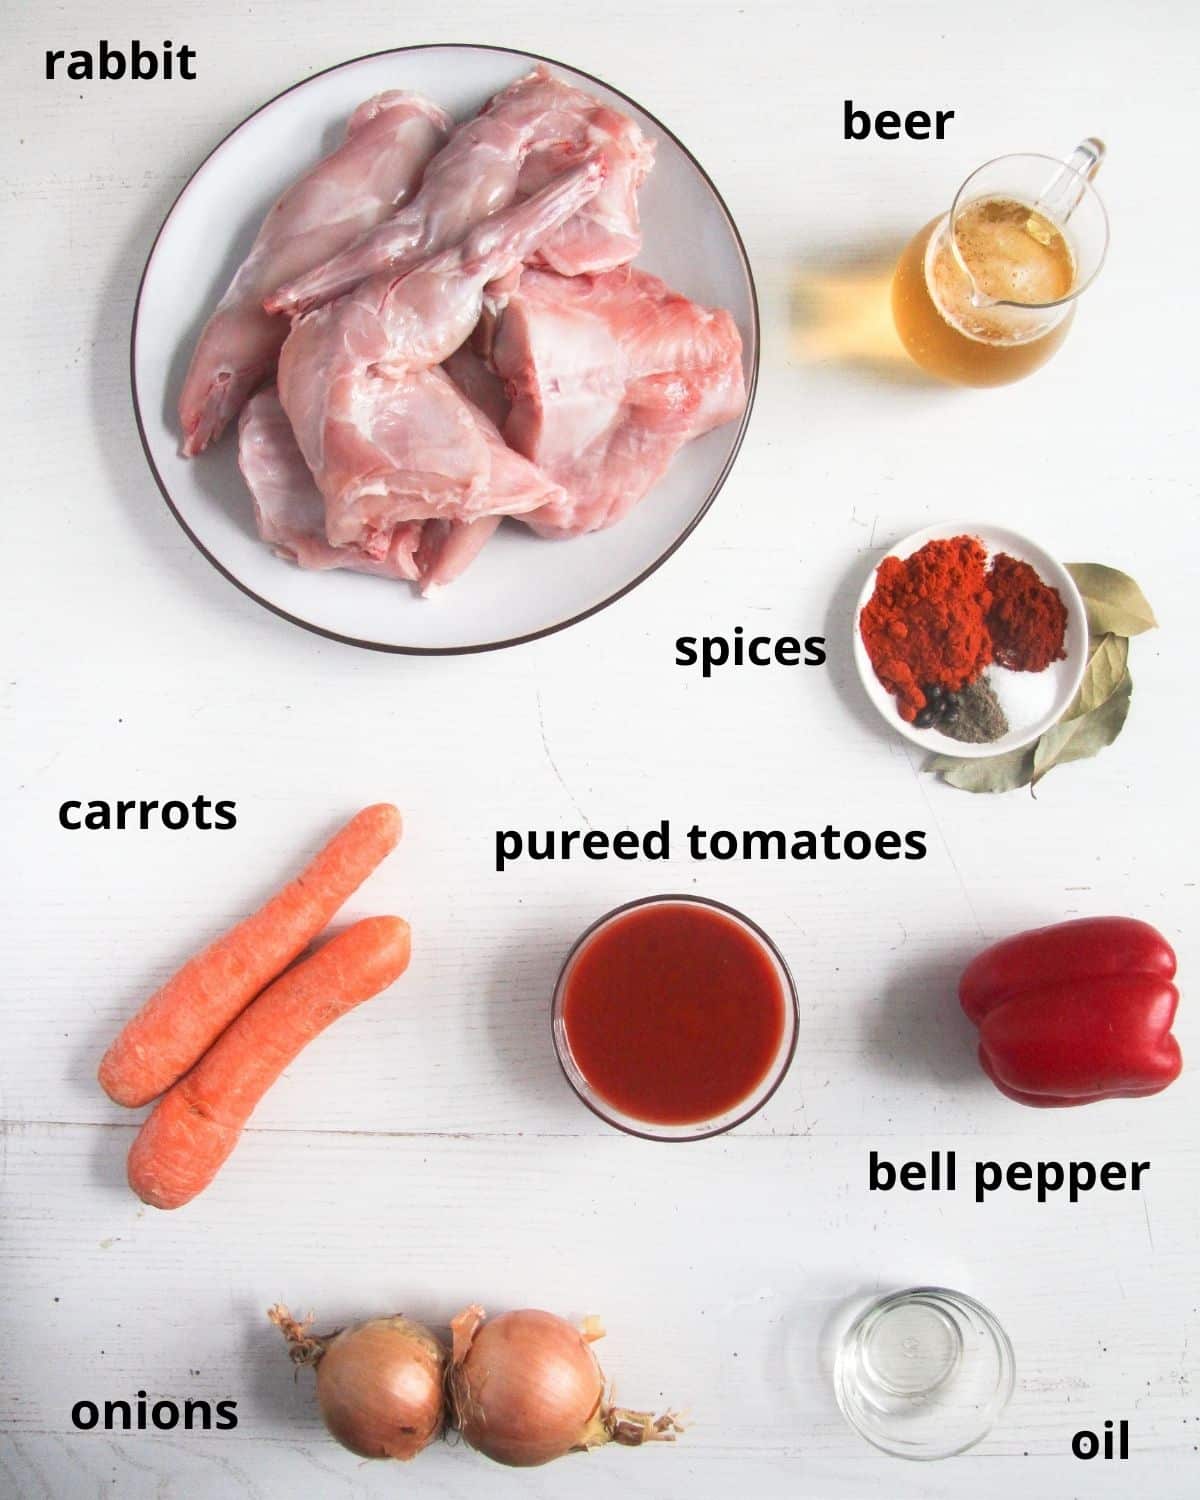 listed ingredients for rabbit stew with beer and vegetables.